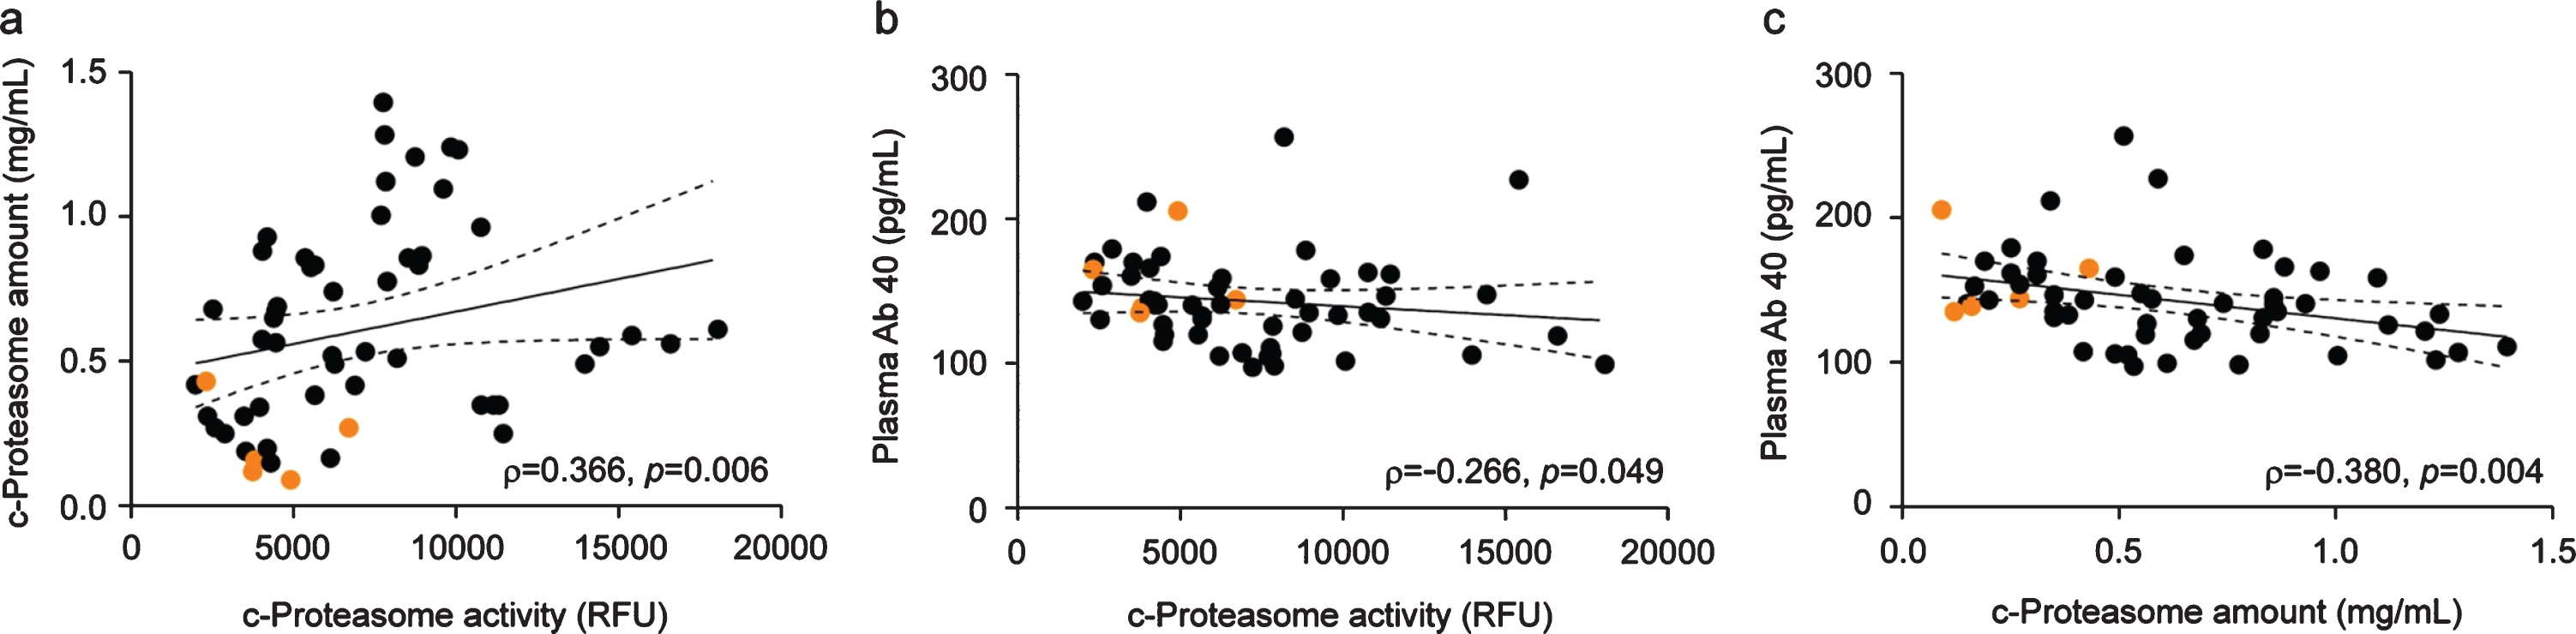 Significant association between c-proteasome activity and the levels of Aβ40 or c-proteasomes in the plasma. a) Spearman’s correlation analysis revealed a strong positive correlation between c-proteasome activity and proteasome level in the plasma from patients with chronic tinnitus (N = 55, ρ= 0.366, p = 0.006). b) Significant negative correlation between Aβ40 concentration and c-proteasome activity in the plasma (Spearman’s correlation: total N = 55, ρ= –0.266, p = 0.049). c) Negative correlation between Aβ40 and c-proteasome levels in the plasma from patients with chronic tinnitus (N = 55, ρ= –0.380, p = 0.004). The orange circles indicate samples from patients with MCI. Solid and dashed lines represent the regression line and 95% confidence intervals, respectively.